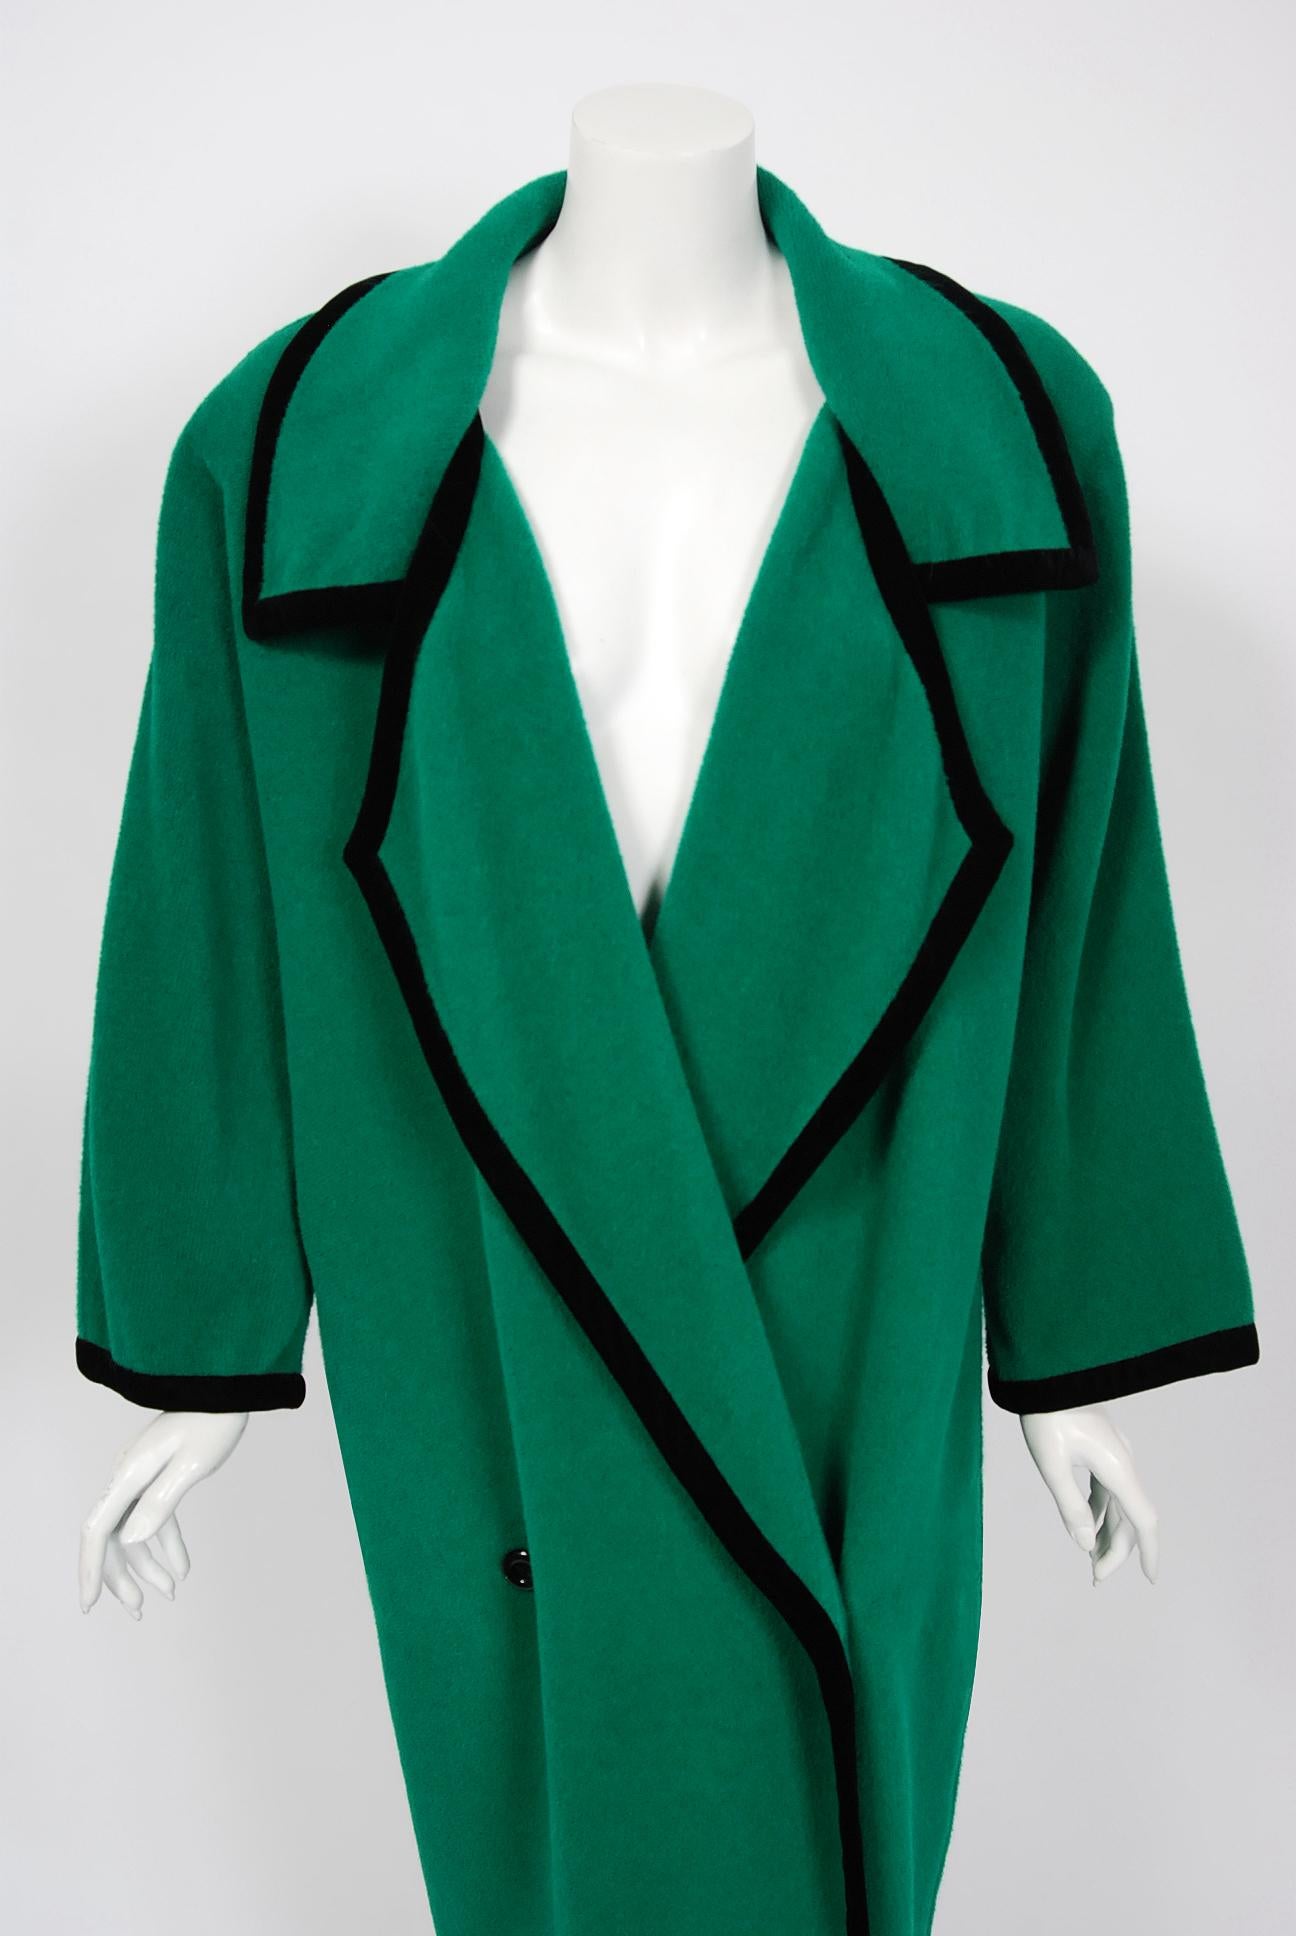 The French designer, Emanuel Ungaro, imagined colorful and elegant draped garments with an emphasis on flamboyant patterns that enhanced a sense of pure femininity. This ultra rare sweater coat, dating back to the early 1980's, is a wonderful